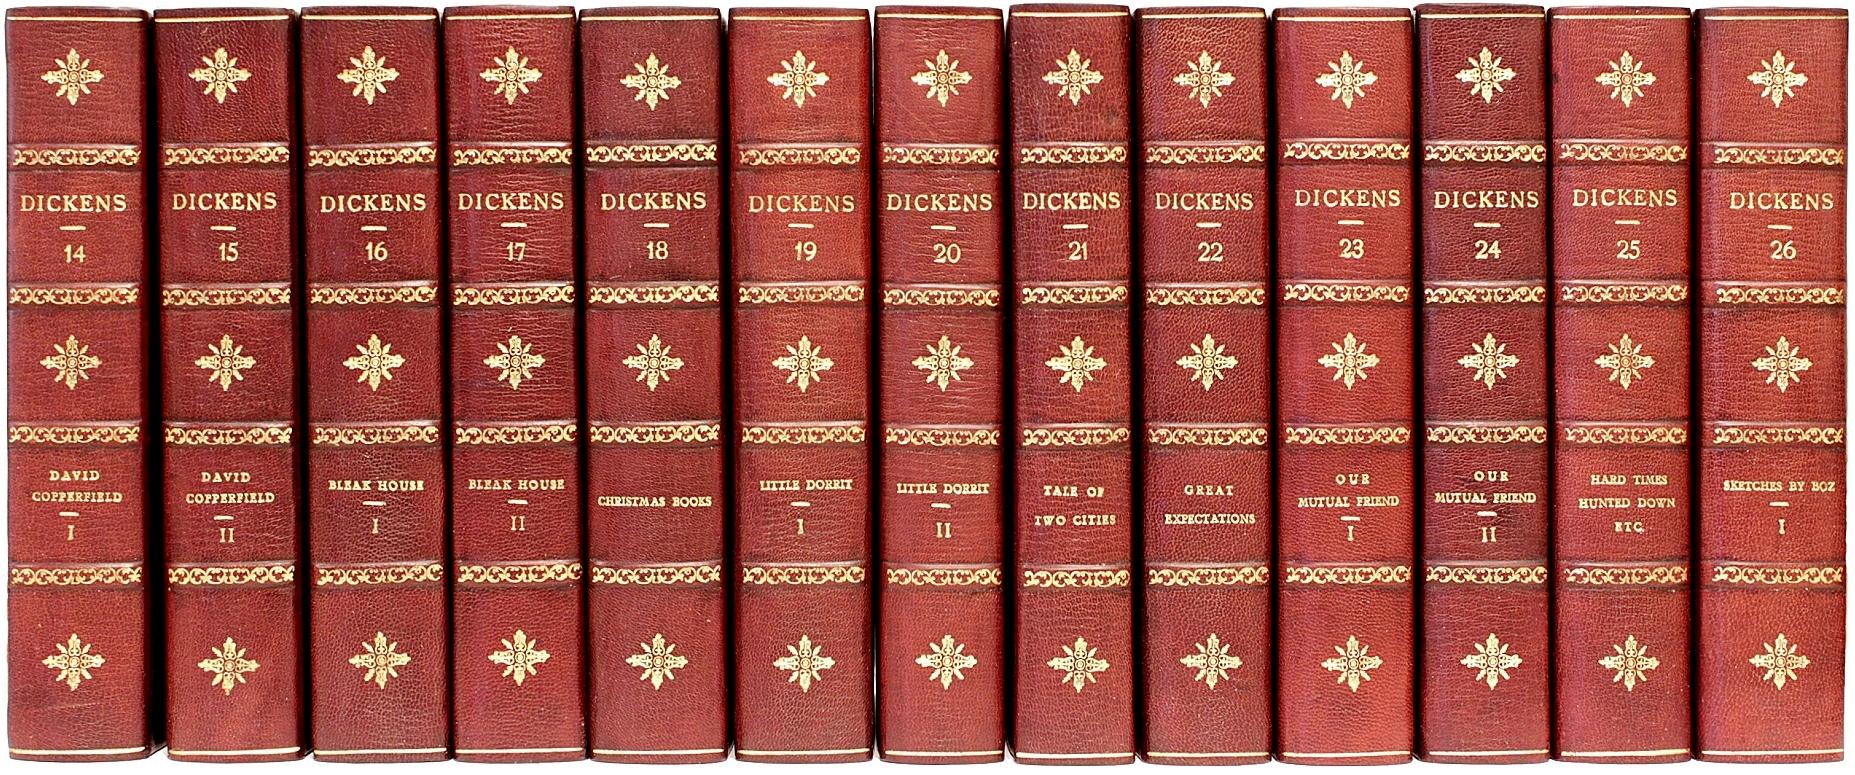 Leather The Complete Works & Life of Charles Dickens, '38 Vols, 1898' Gadshill Edition